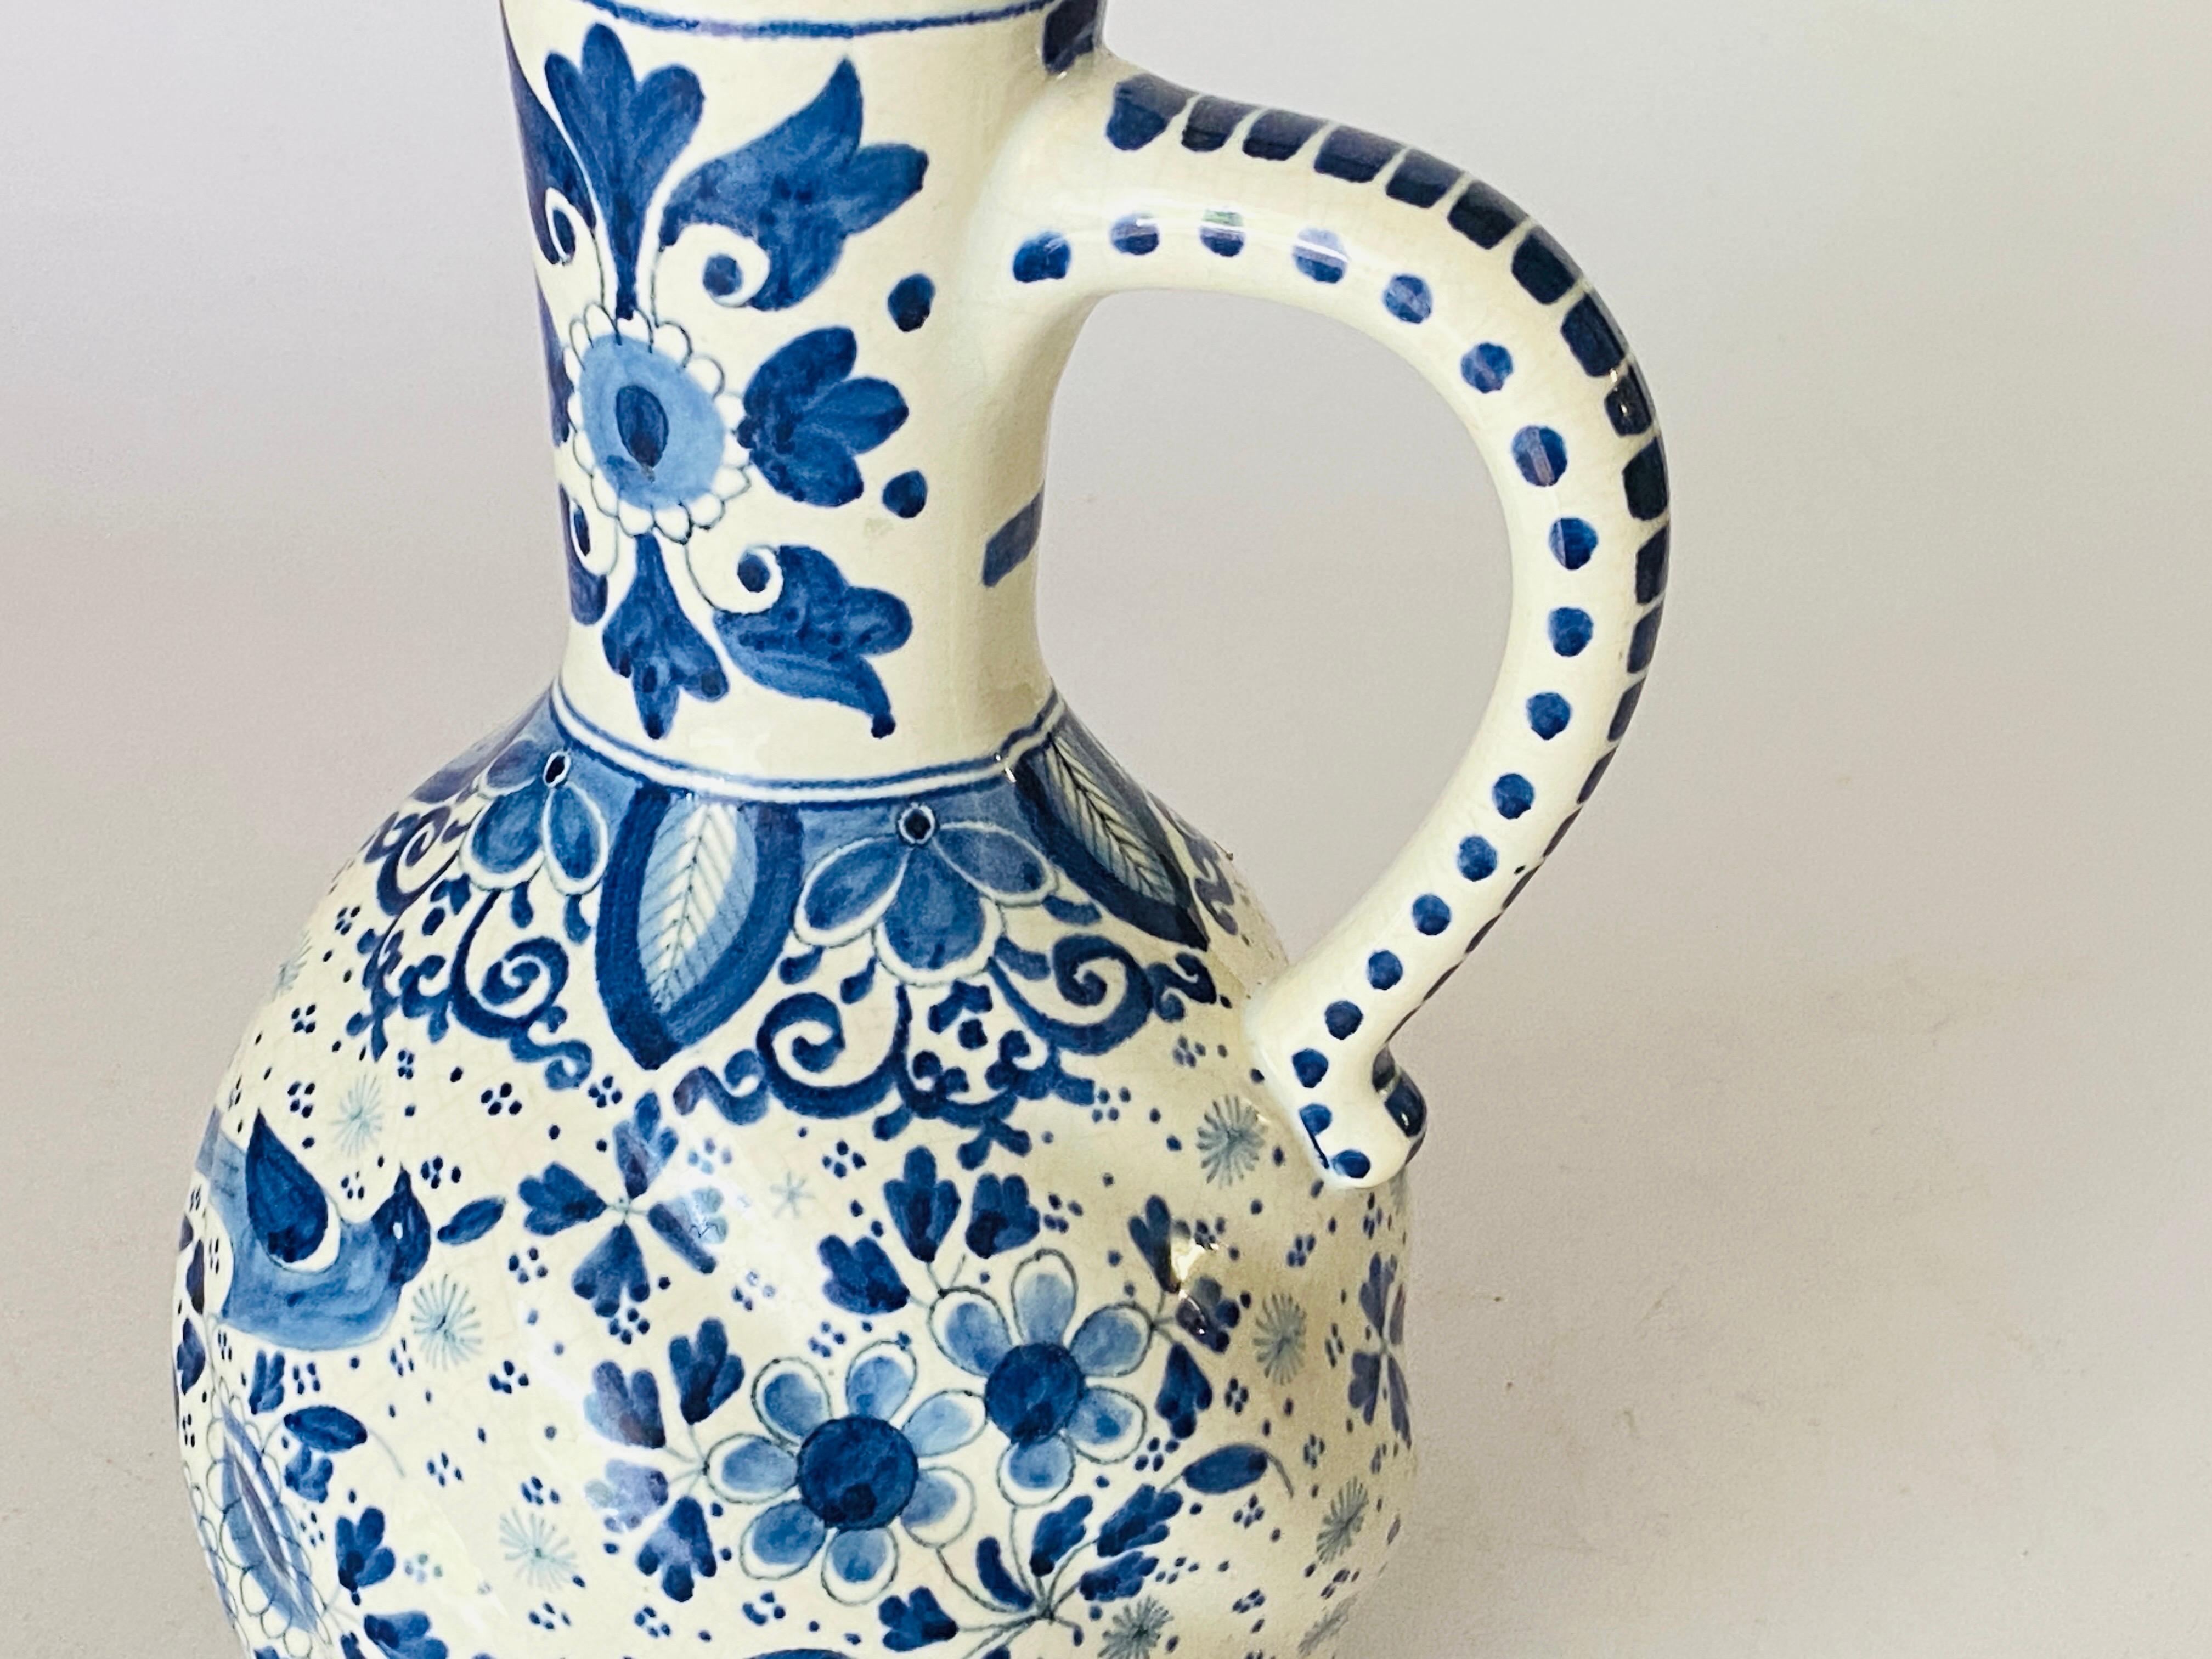 Delft Jug in Faïence, White and Blue, 19th Century Netherlands In Good Condition For Sale In Auribeau sur Siagne, FR